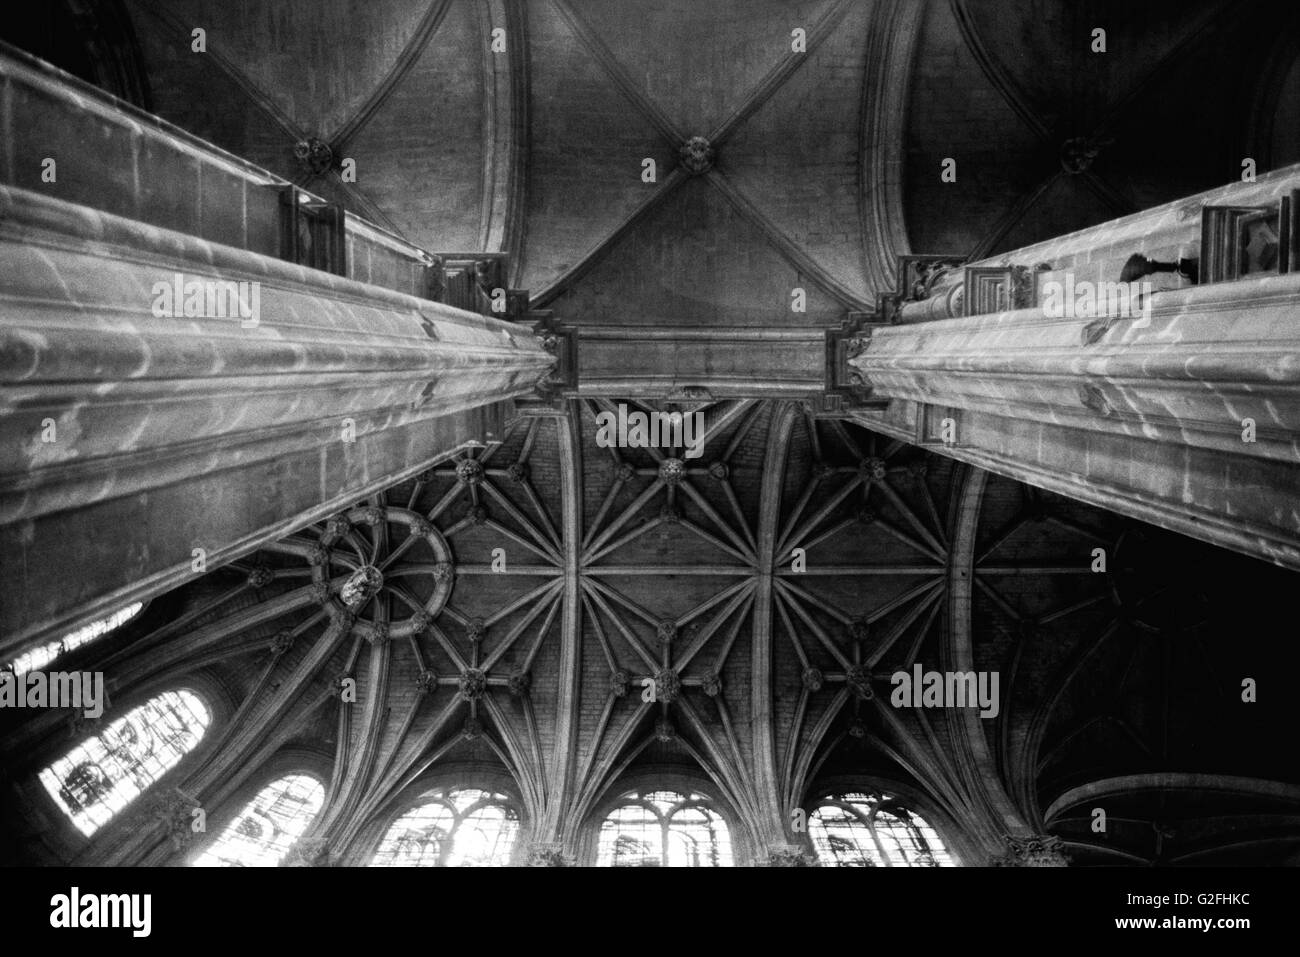 Vaulted Ceiling between Two Columns, Church, Low Angle View, Paris, France Stock Photo